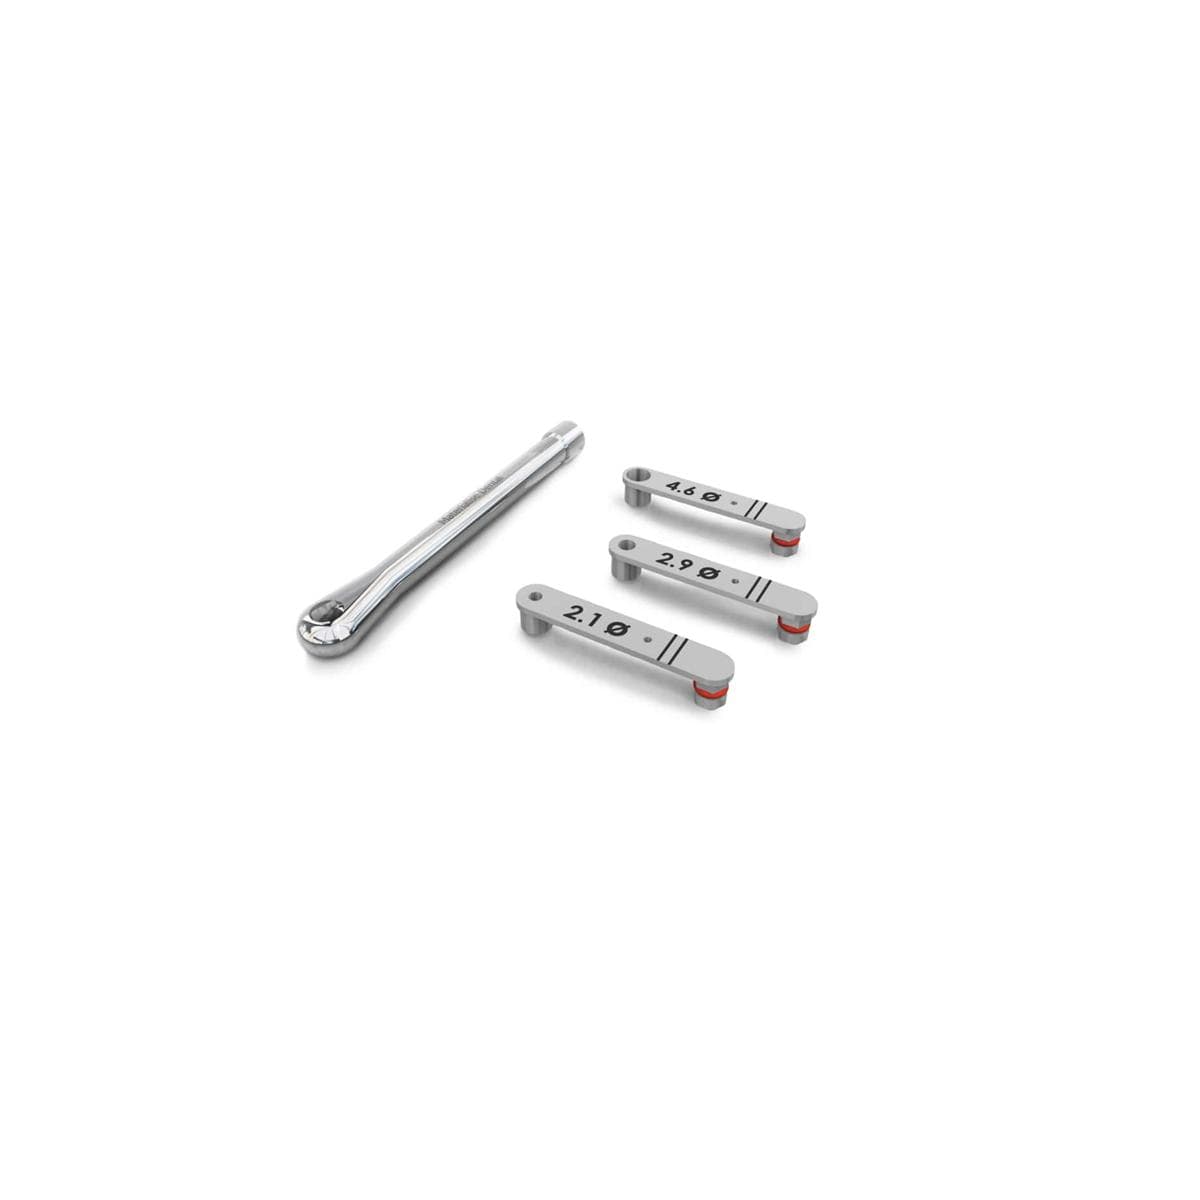 Cl de forage DENTSPLY SIRONA - Diamtre 3.6mm - Taille M